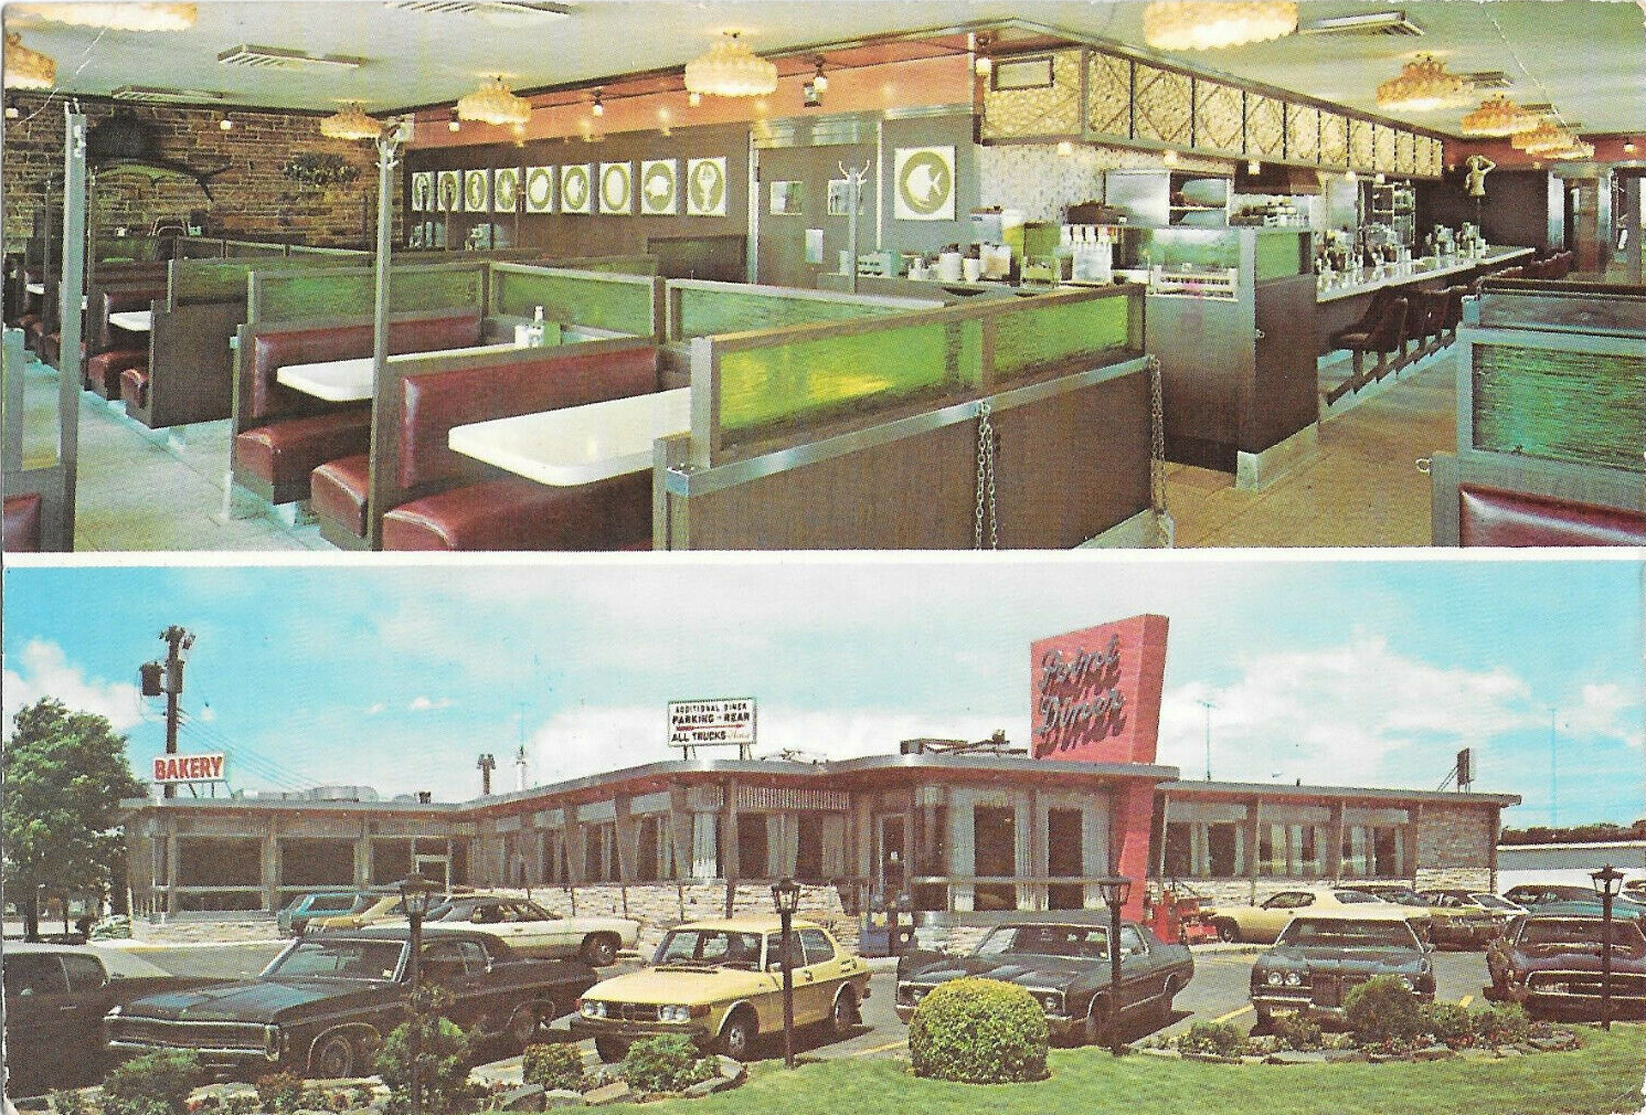 Somers Point Diner - Interior and exterior